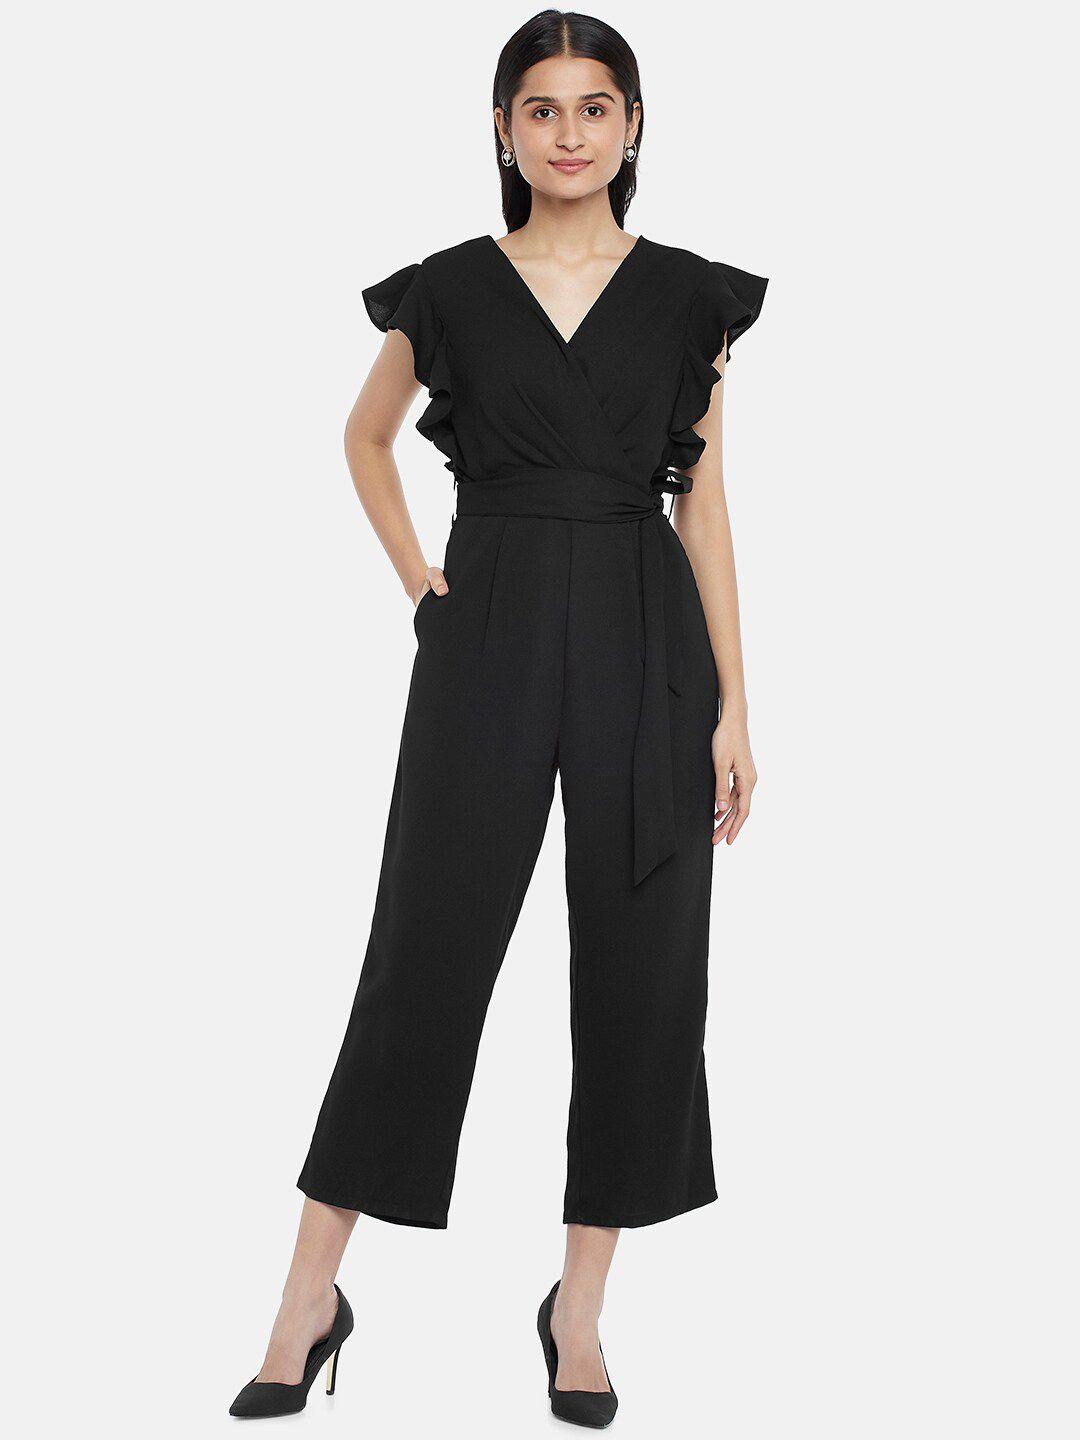 annabelle by pantaloons black basic jumpsuit with ruffles